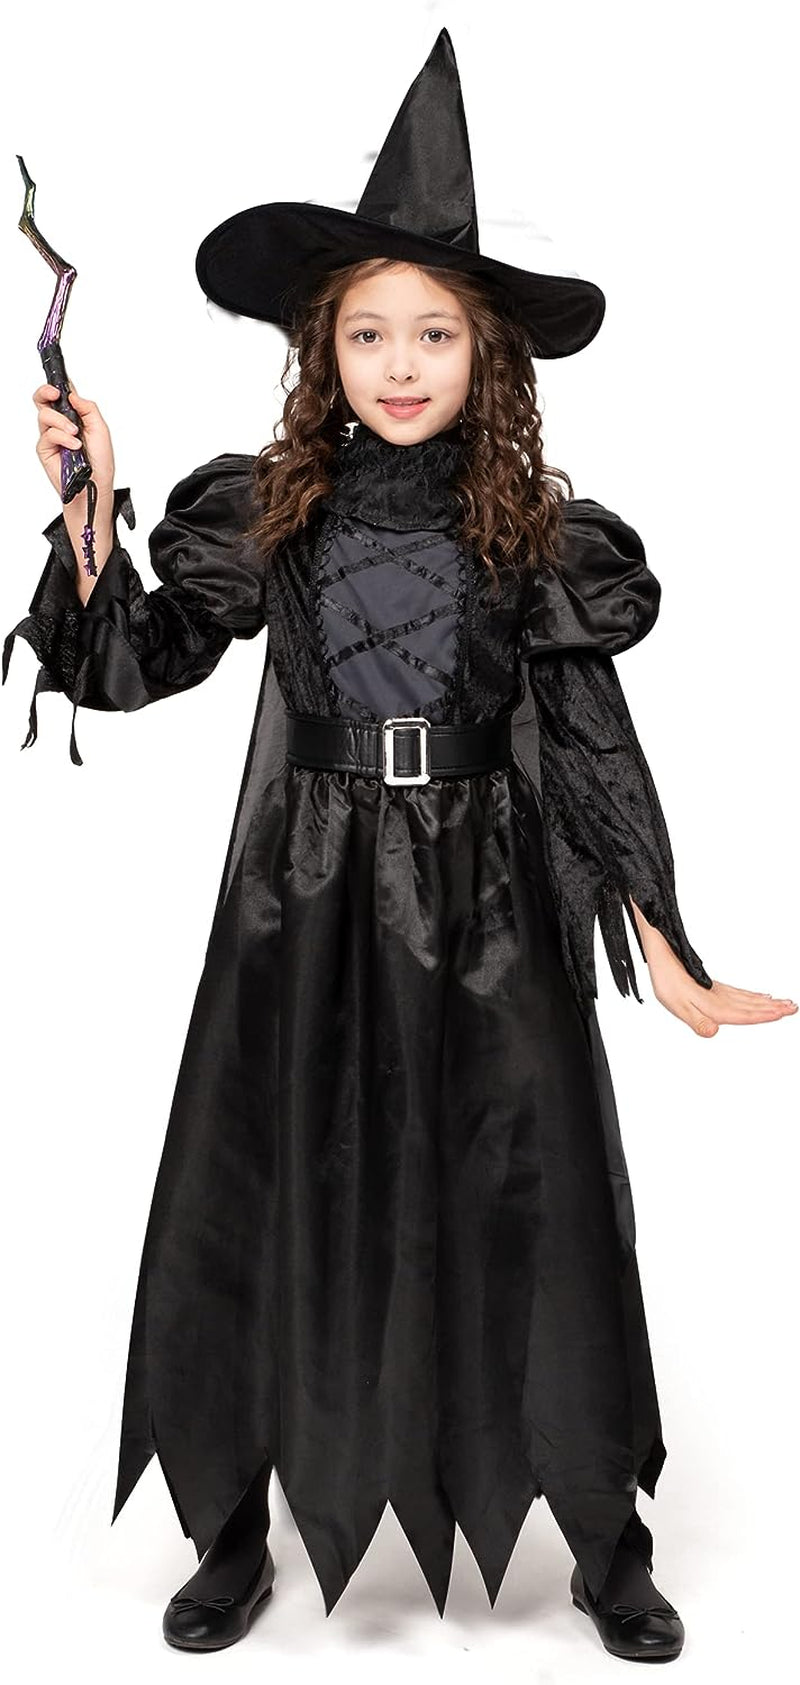 Spooktacular Creations Girl'S Black Witch Costume for Halloween Costume Party, Classic Black Witch Costume with Broom  Spooktacular Creations   